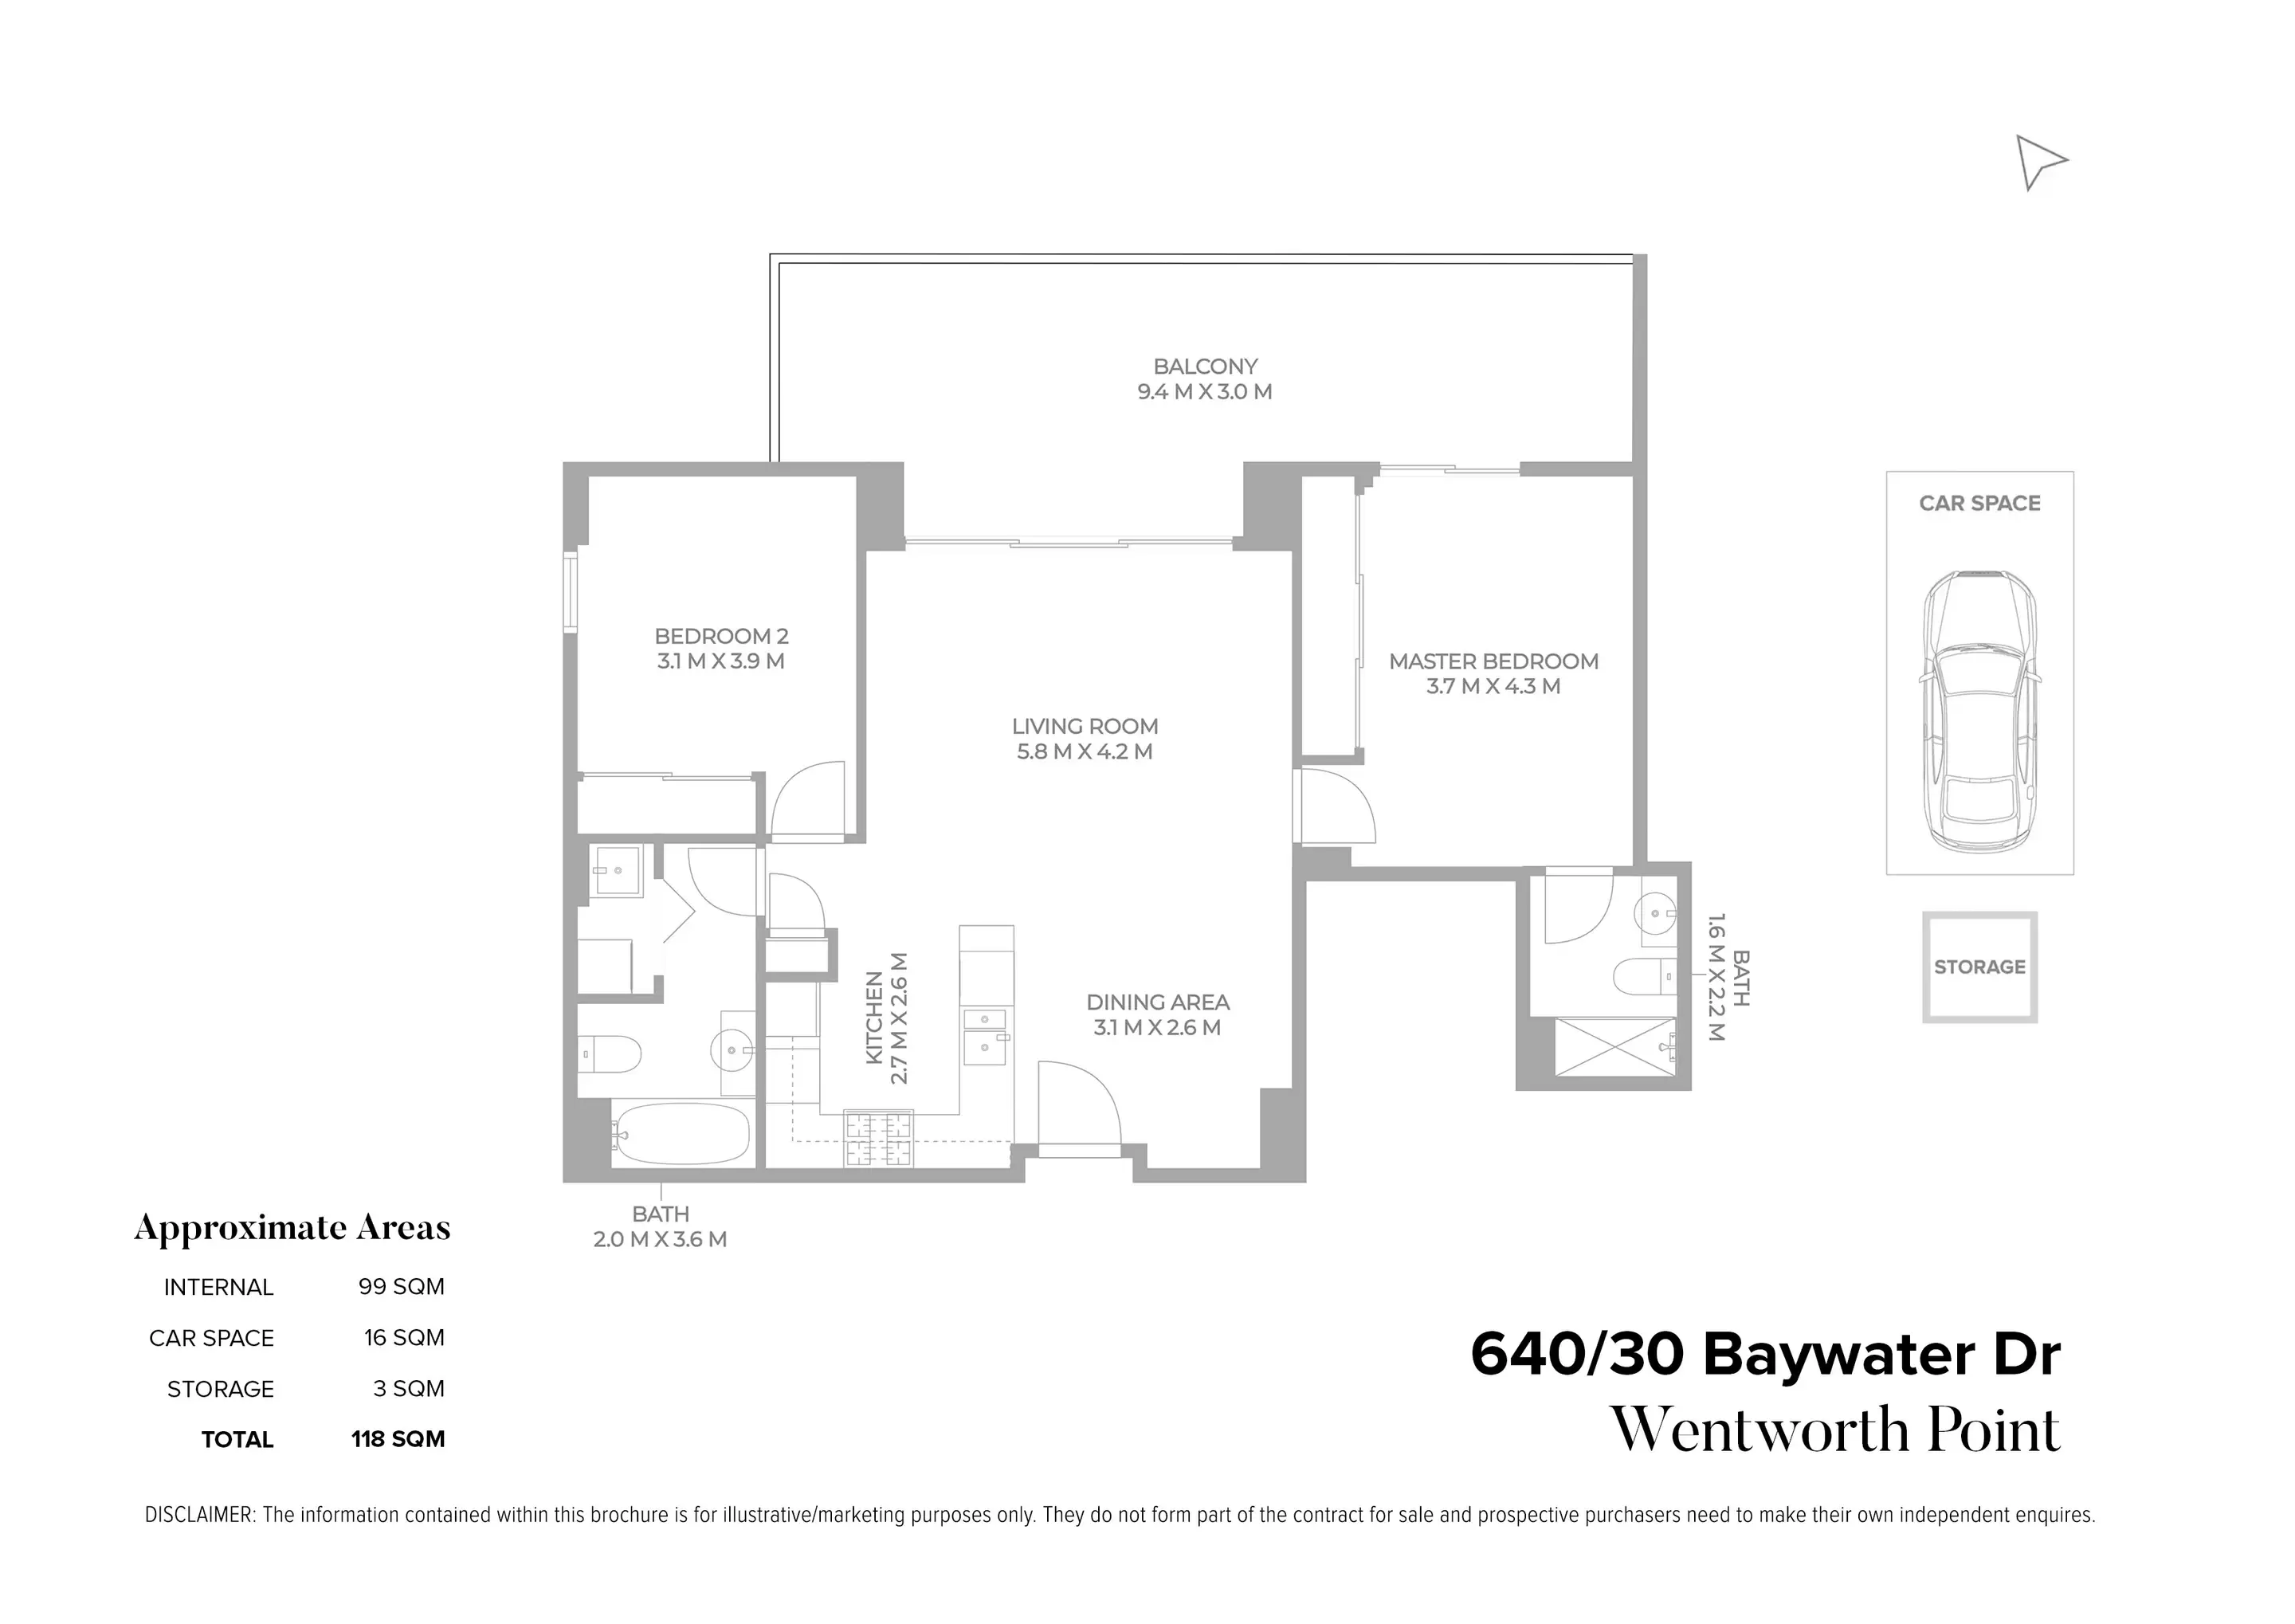 640/30 Baywater Drive, Wentworth Point For Sale by Chidiac Realty - floorplan